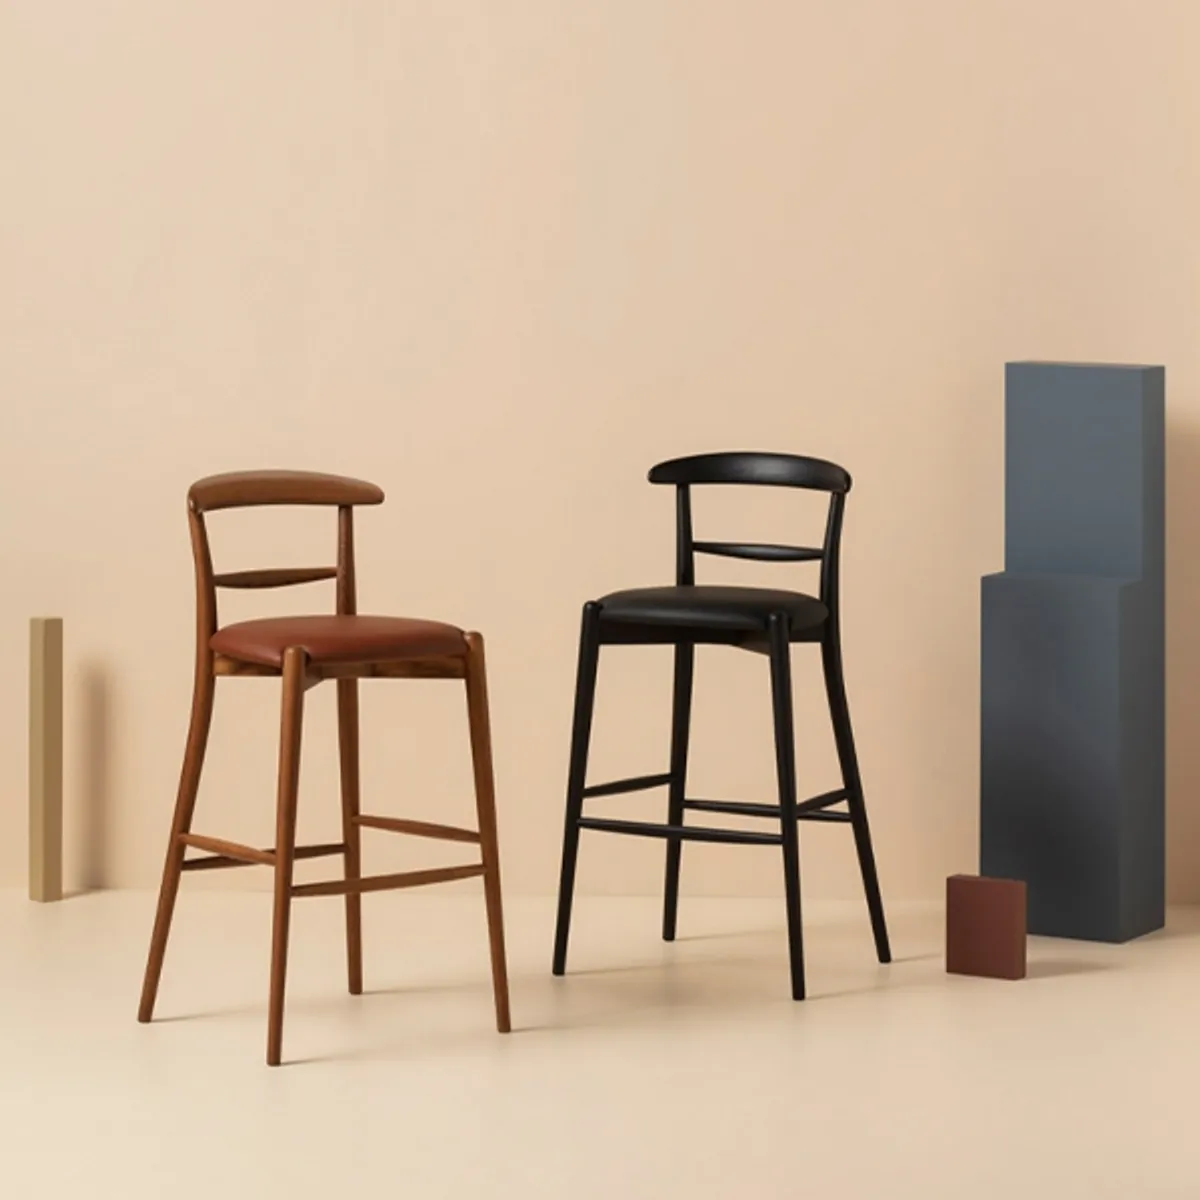 Emotion soft bar stool Inside Out Contracts2